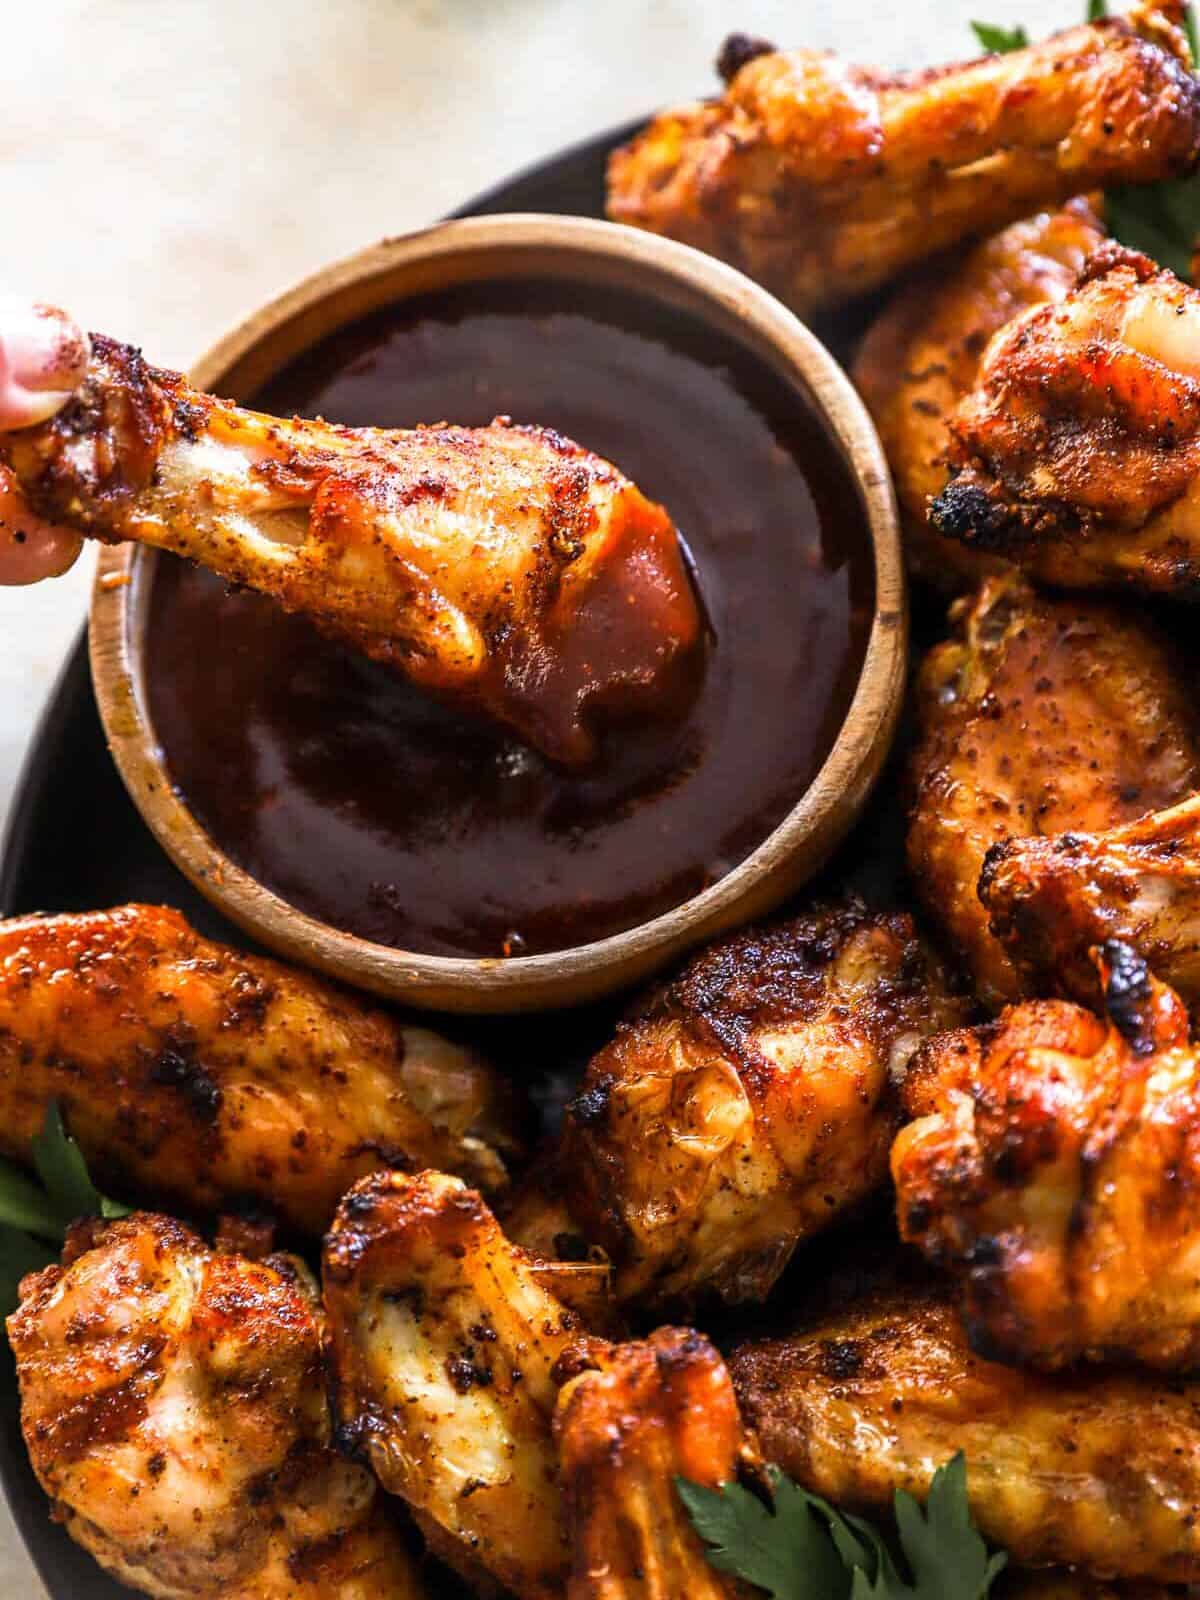 a smoked chicken wing dipped in barbecue sauce.